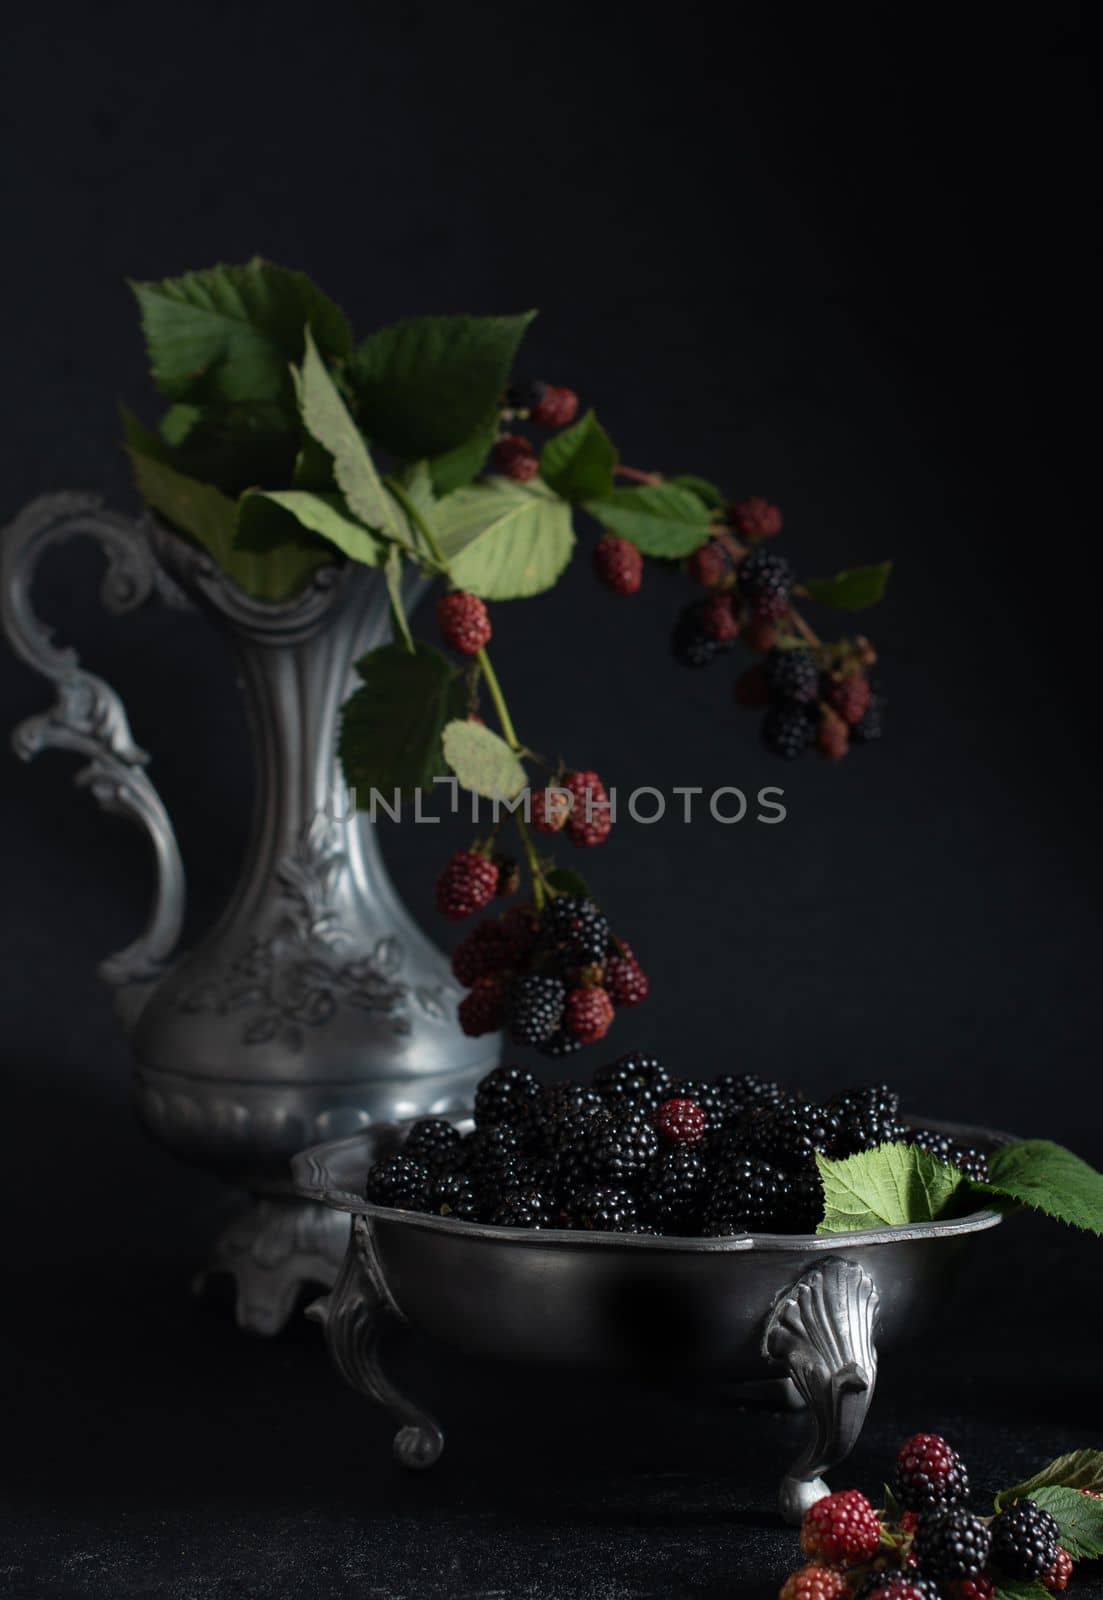 A full plate of the ripe blackberries, and a sprig of red blackberries on a pewter bowl on the dark background, copy space,High quality photo